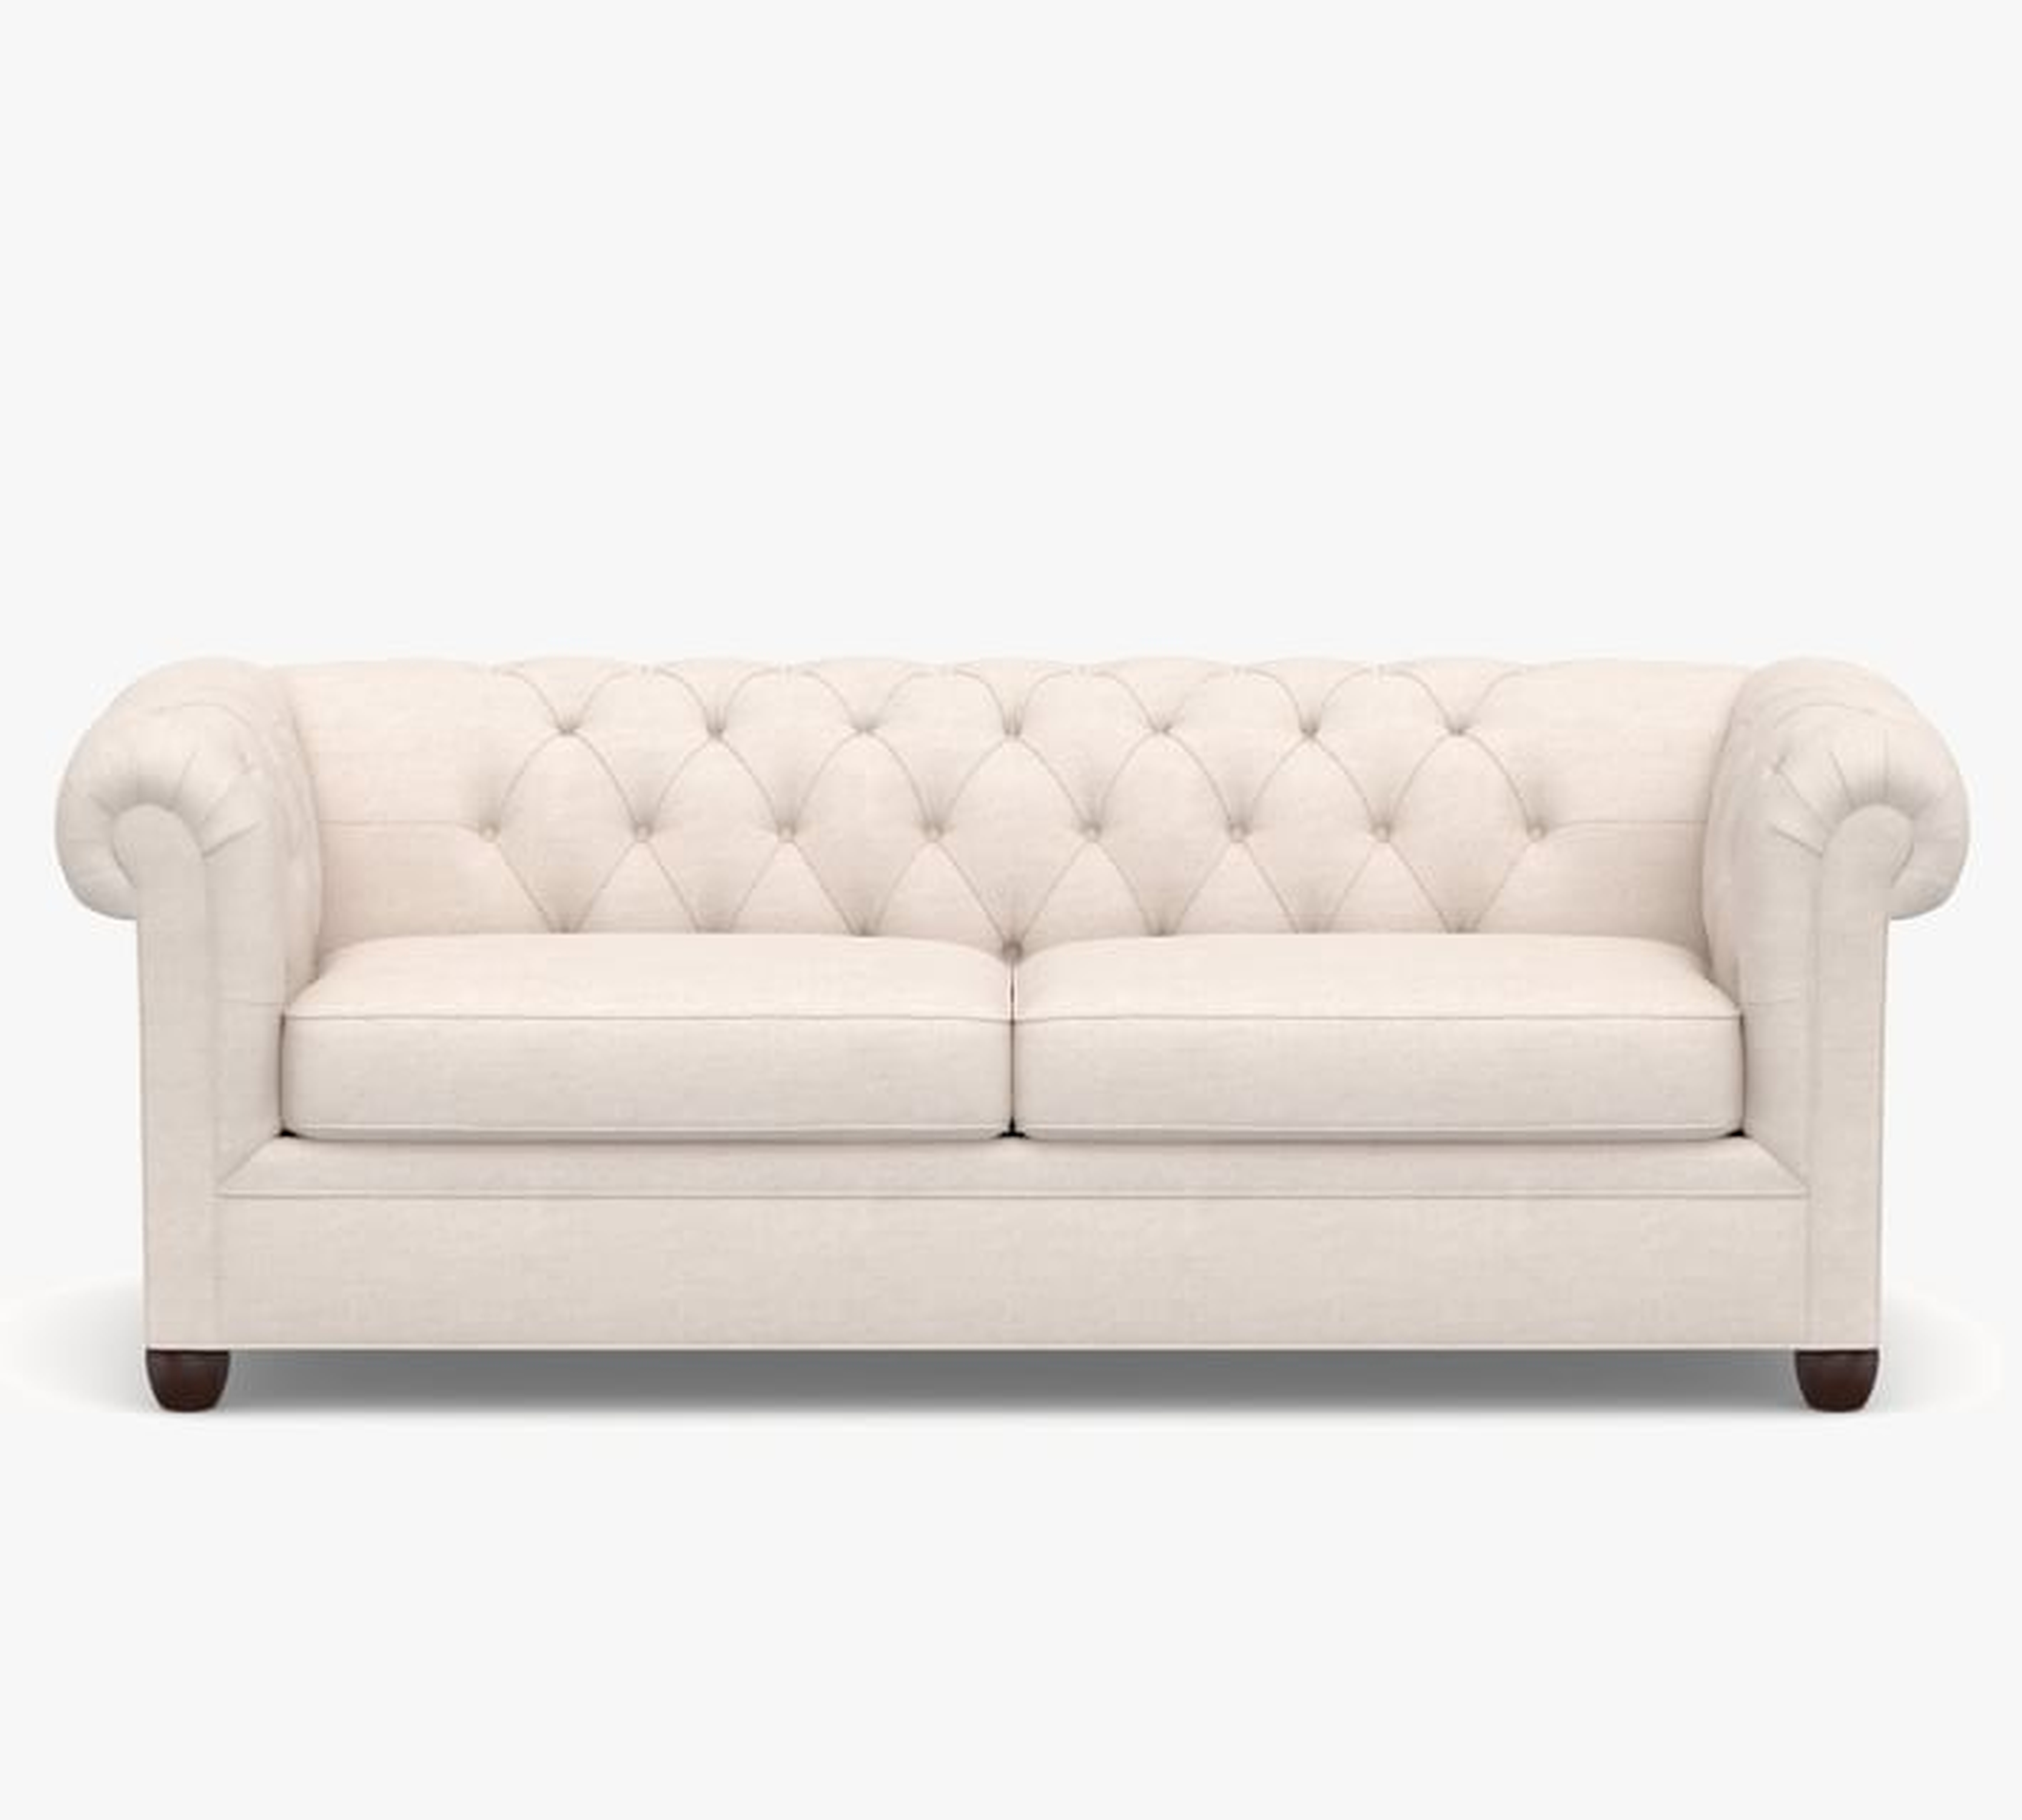 Chesterfield Roll Arm Upholstered Queen Sleeper Sofa, Memory Foam Cushions, Performance Boucle Oatmeal - Pottery Barn